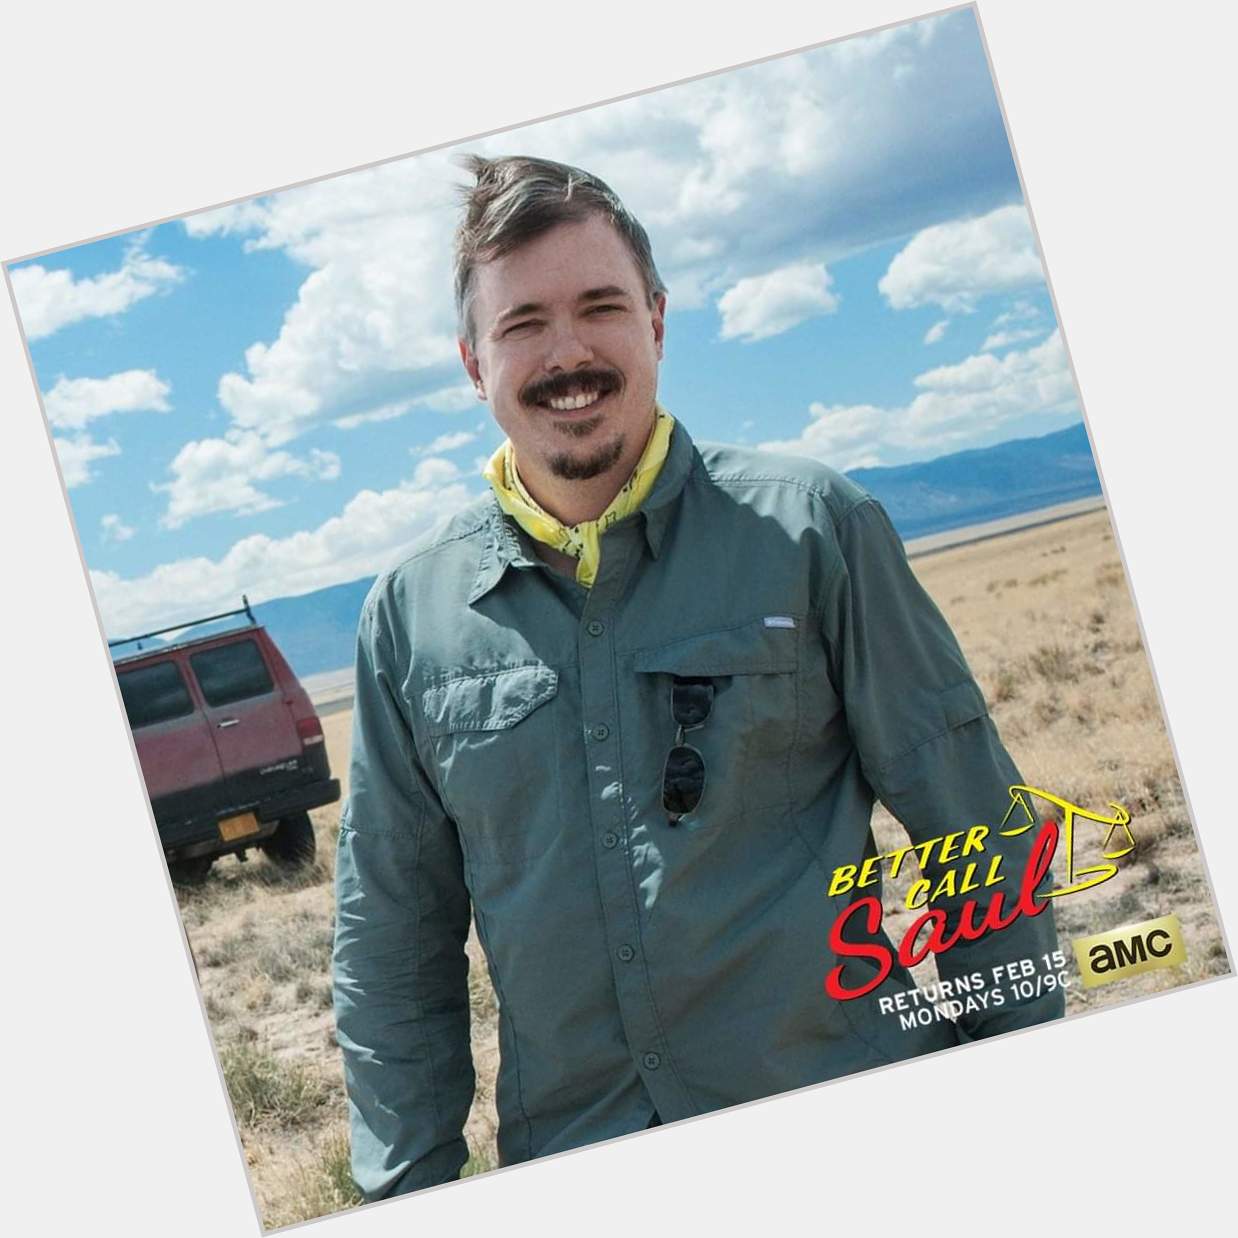 Happy birthday to the one and only Vince Gilligan!  